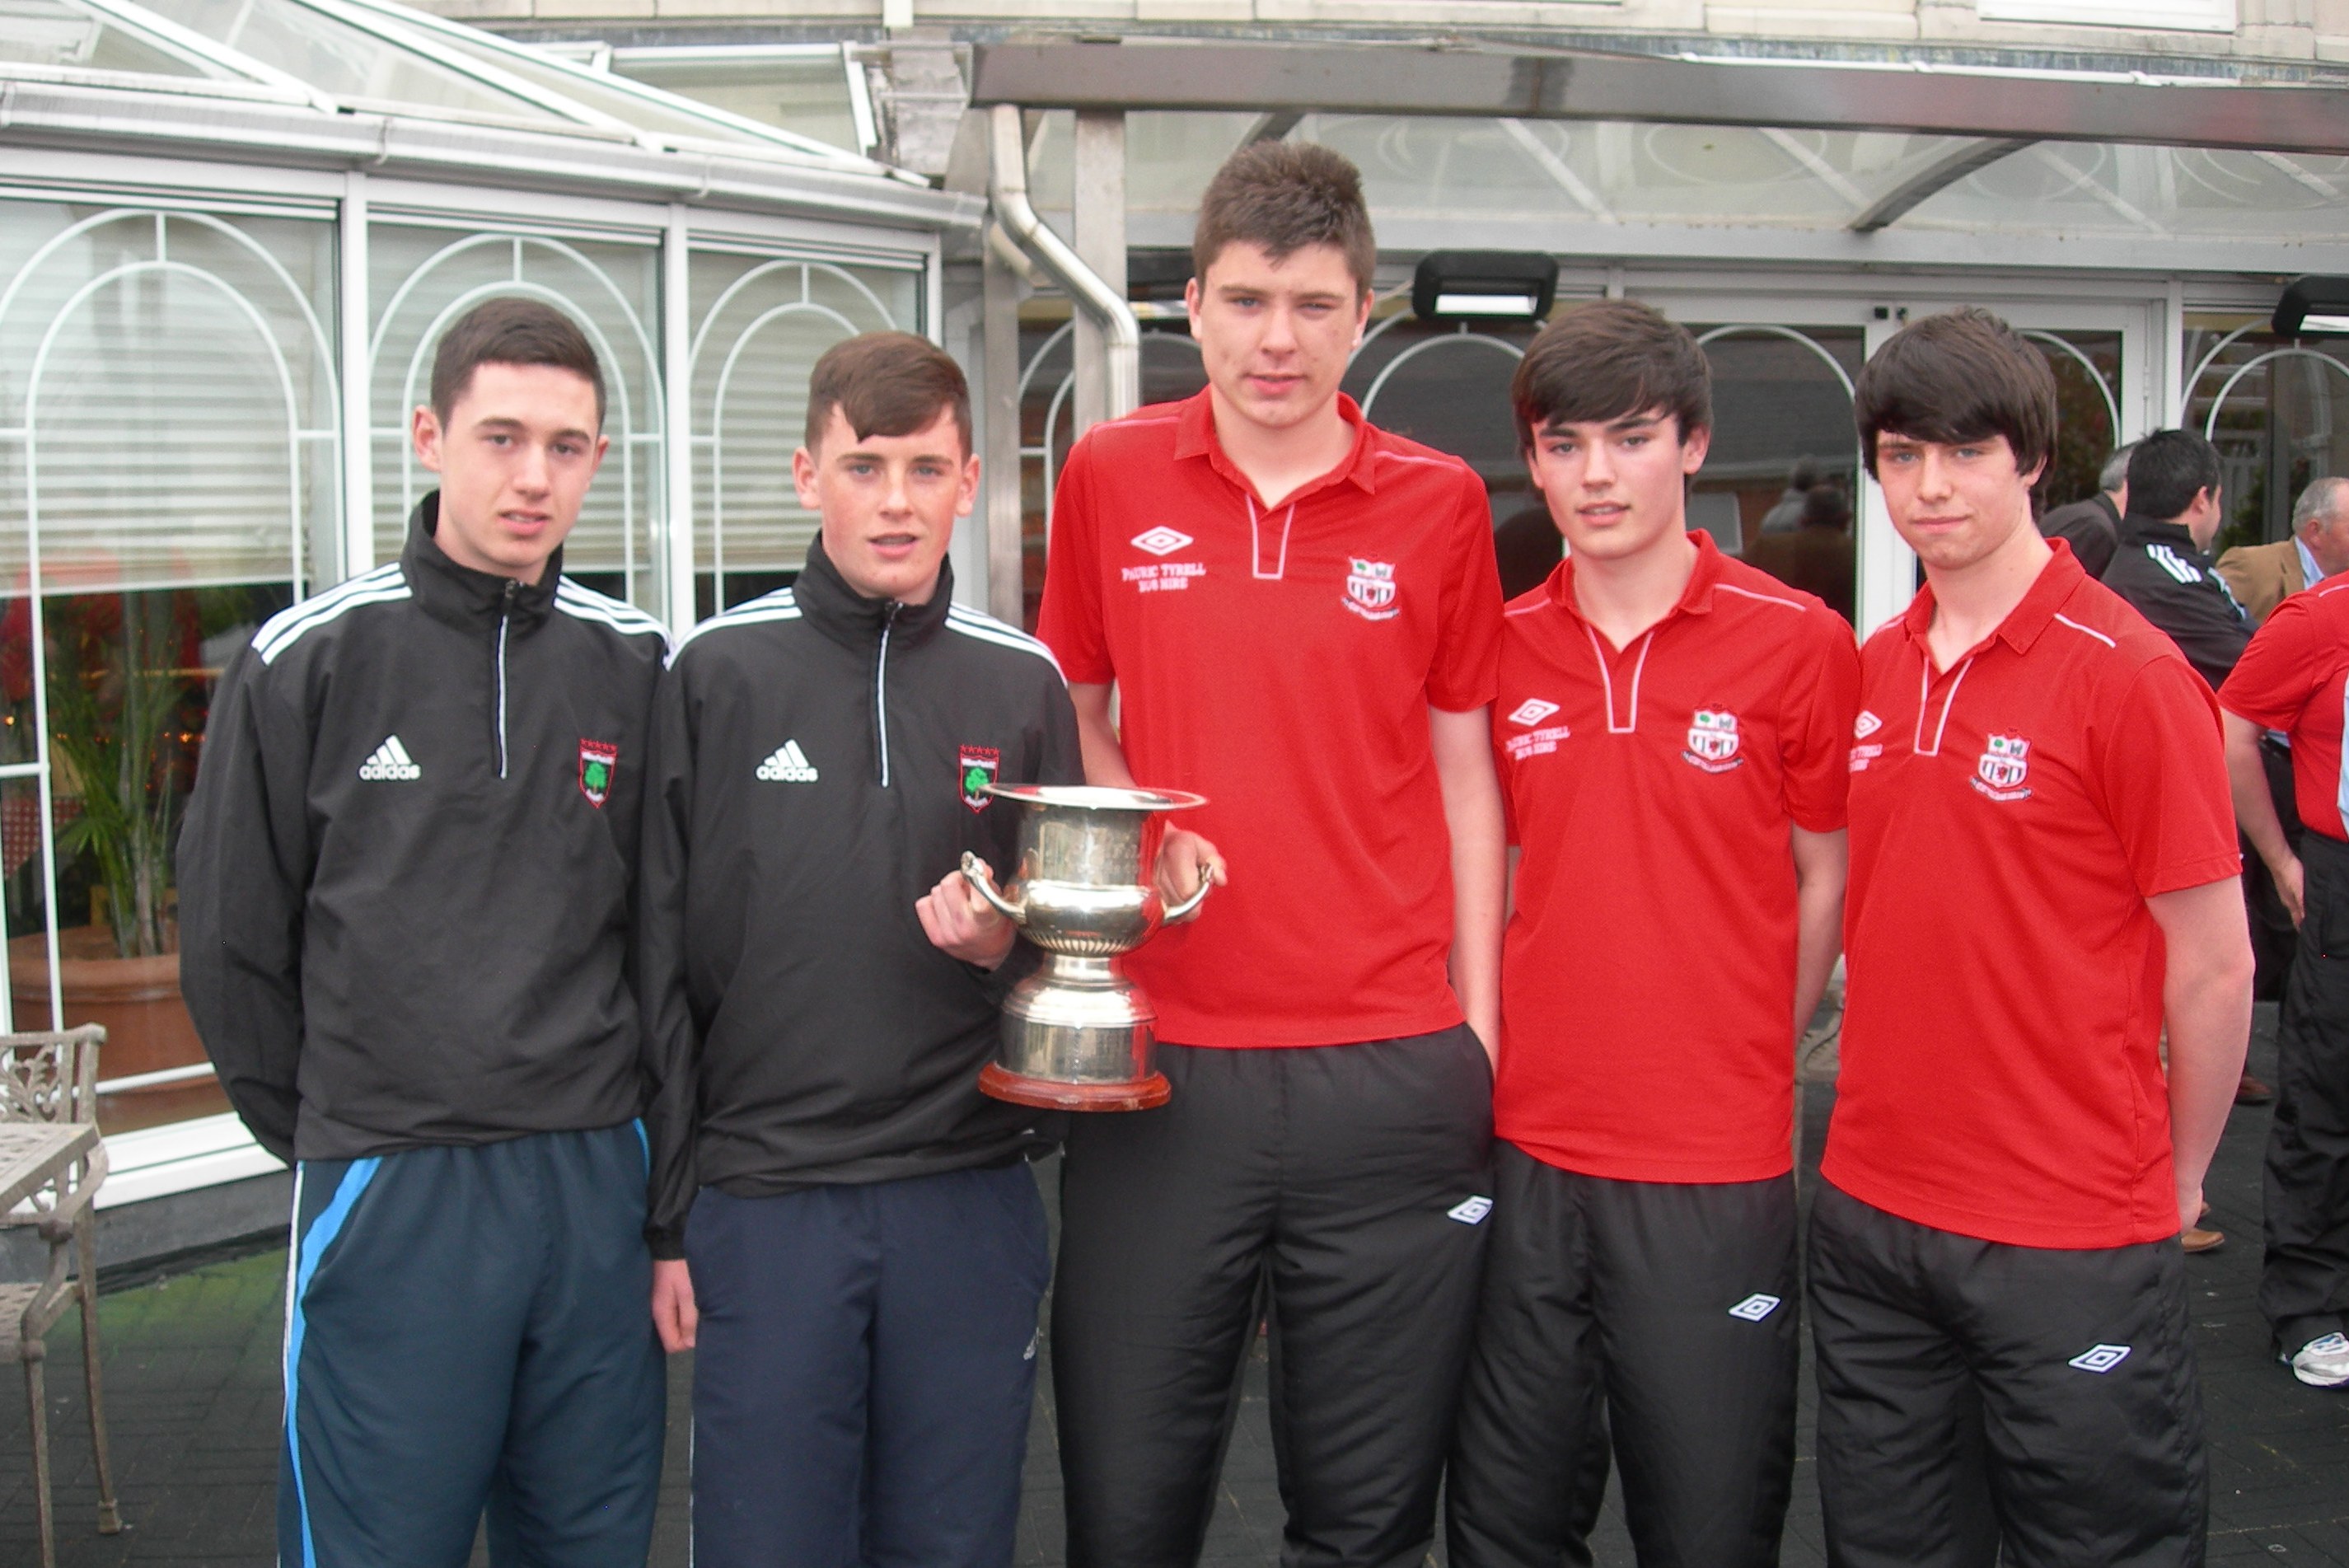 Willow Park and Edenderry Town Youths